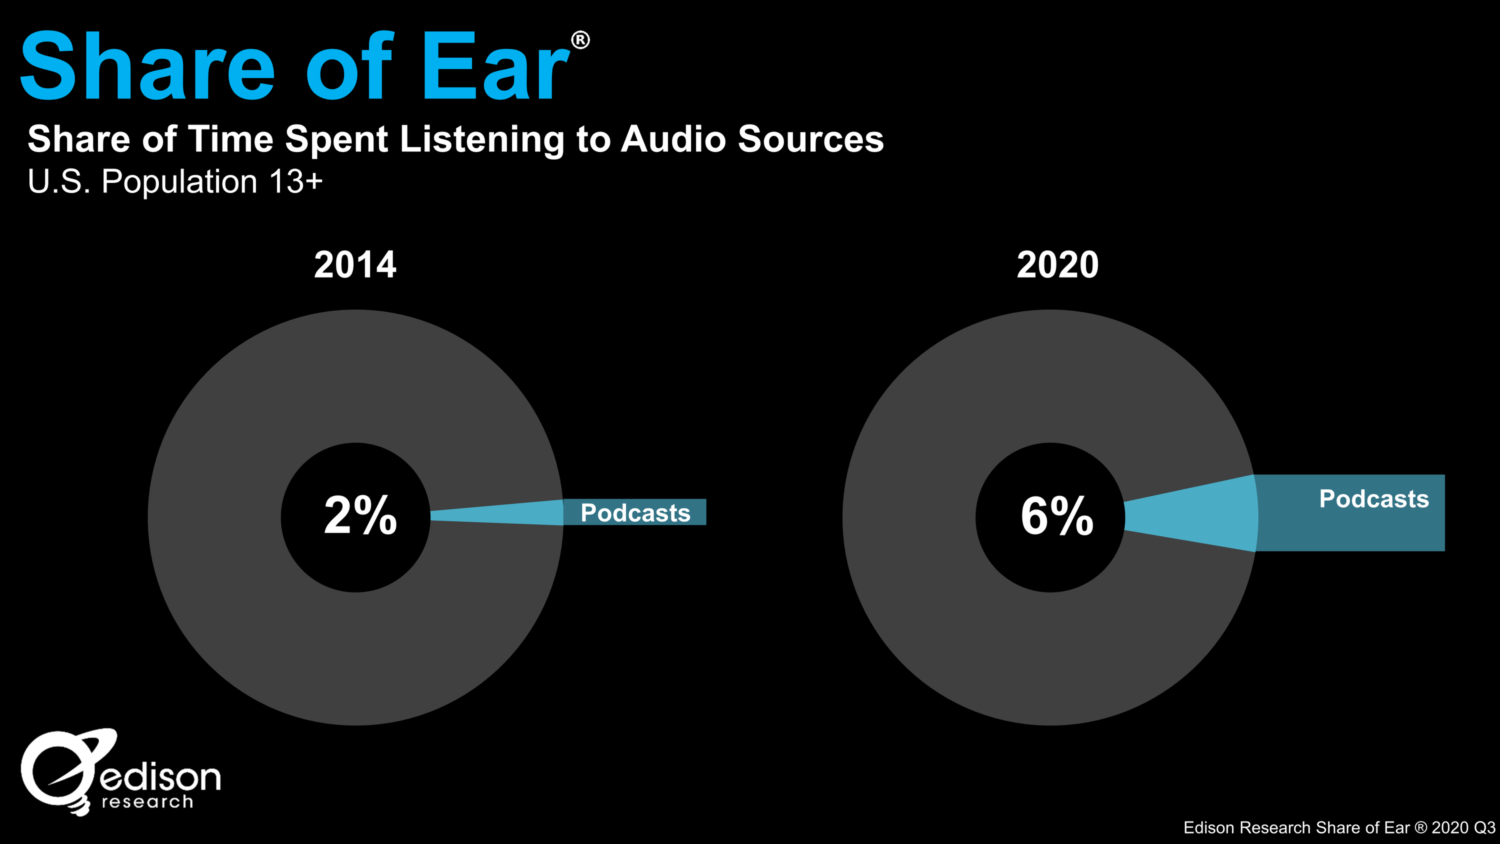 edison research share of ear podcast statistics 2021